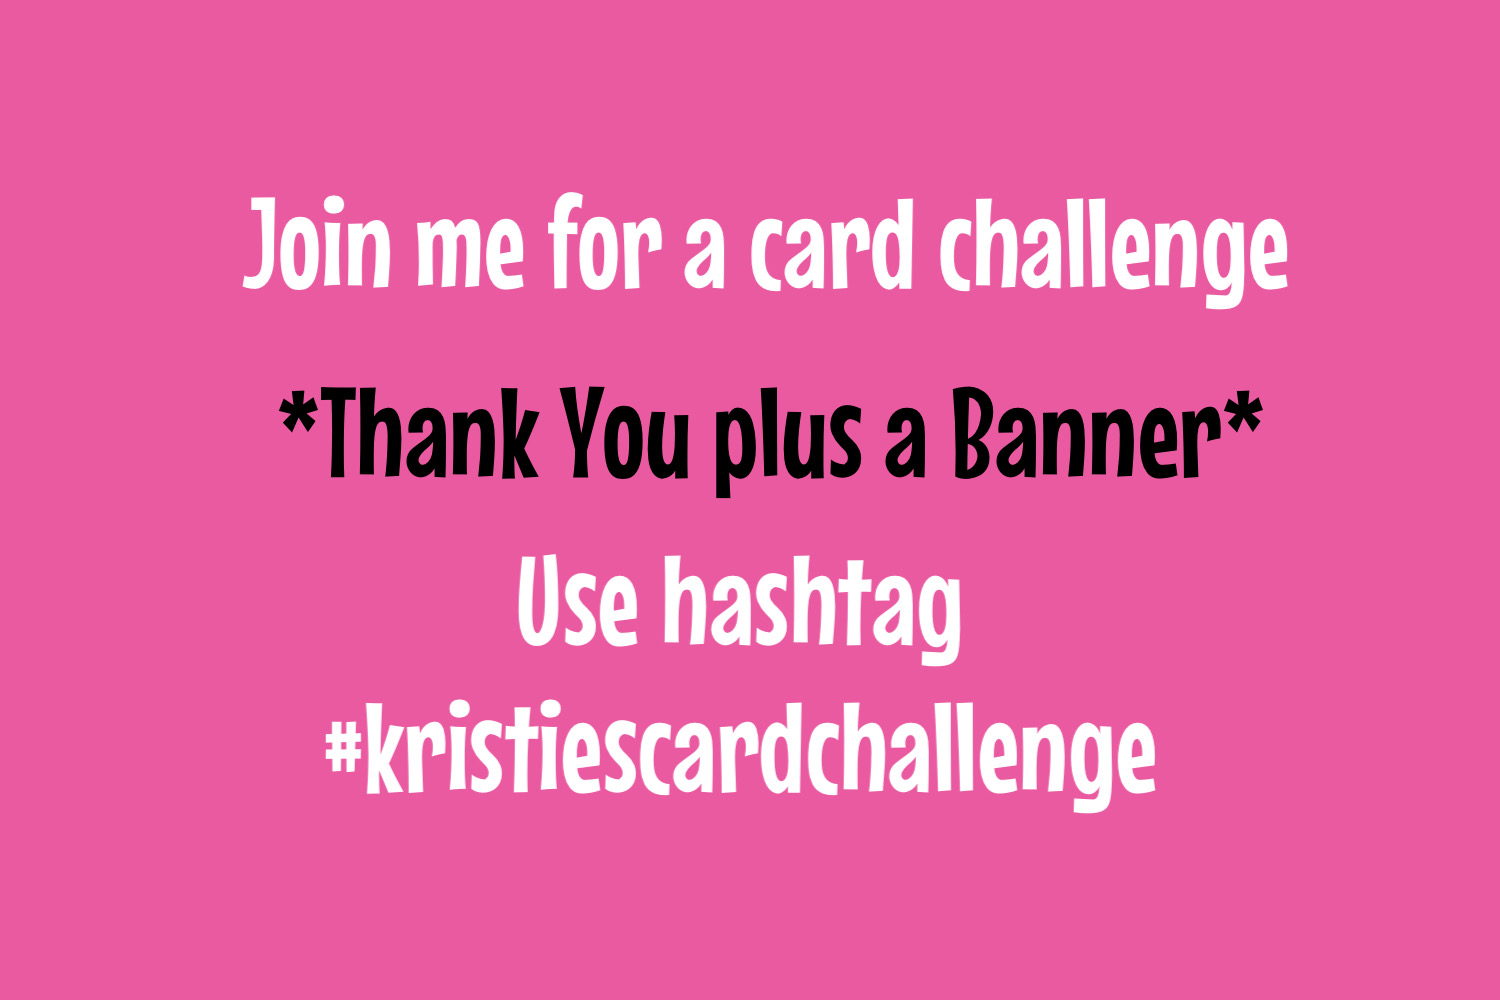 Kristie’s Card Challenge – Thank You plus a Banner